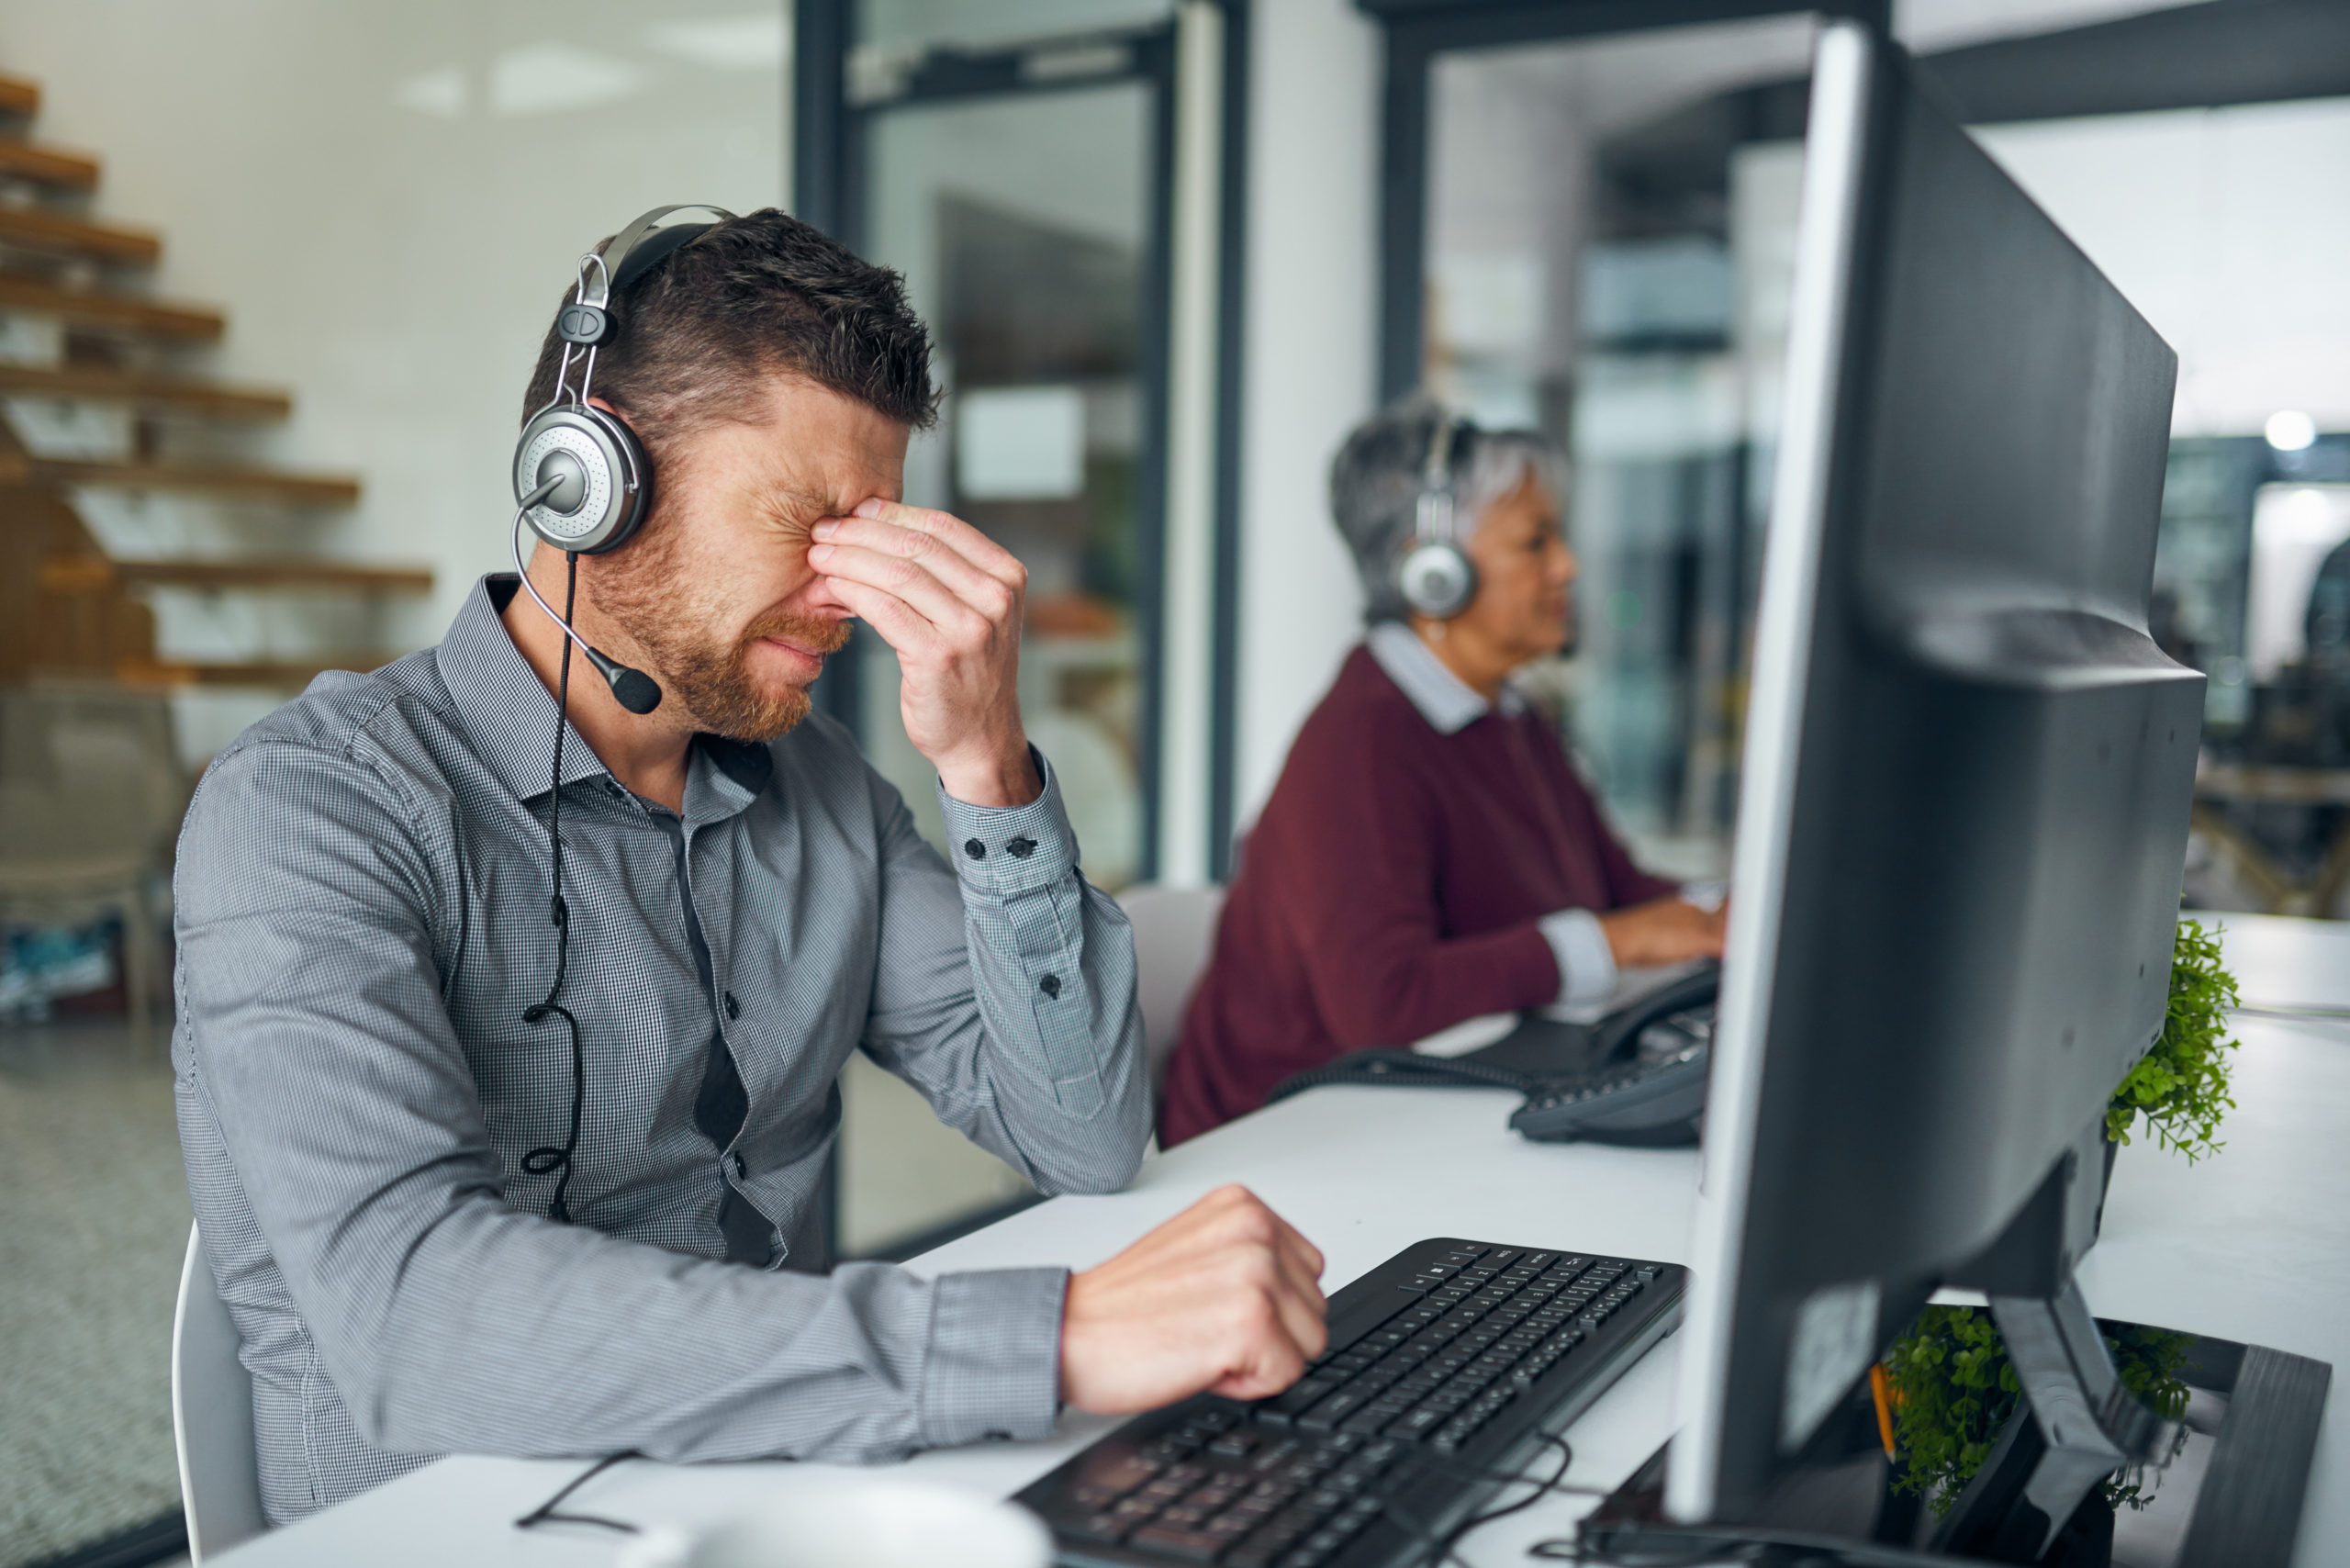 Customer service burnout is real